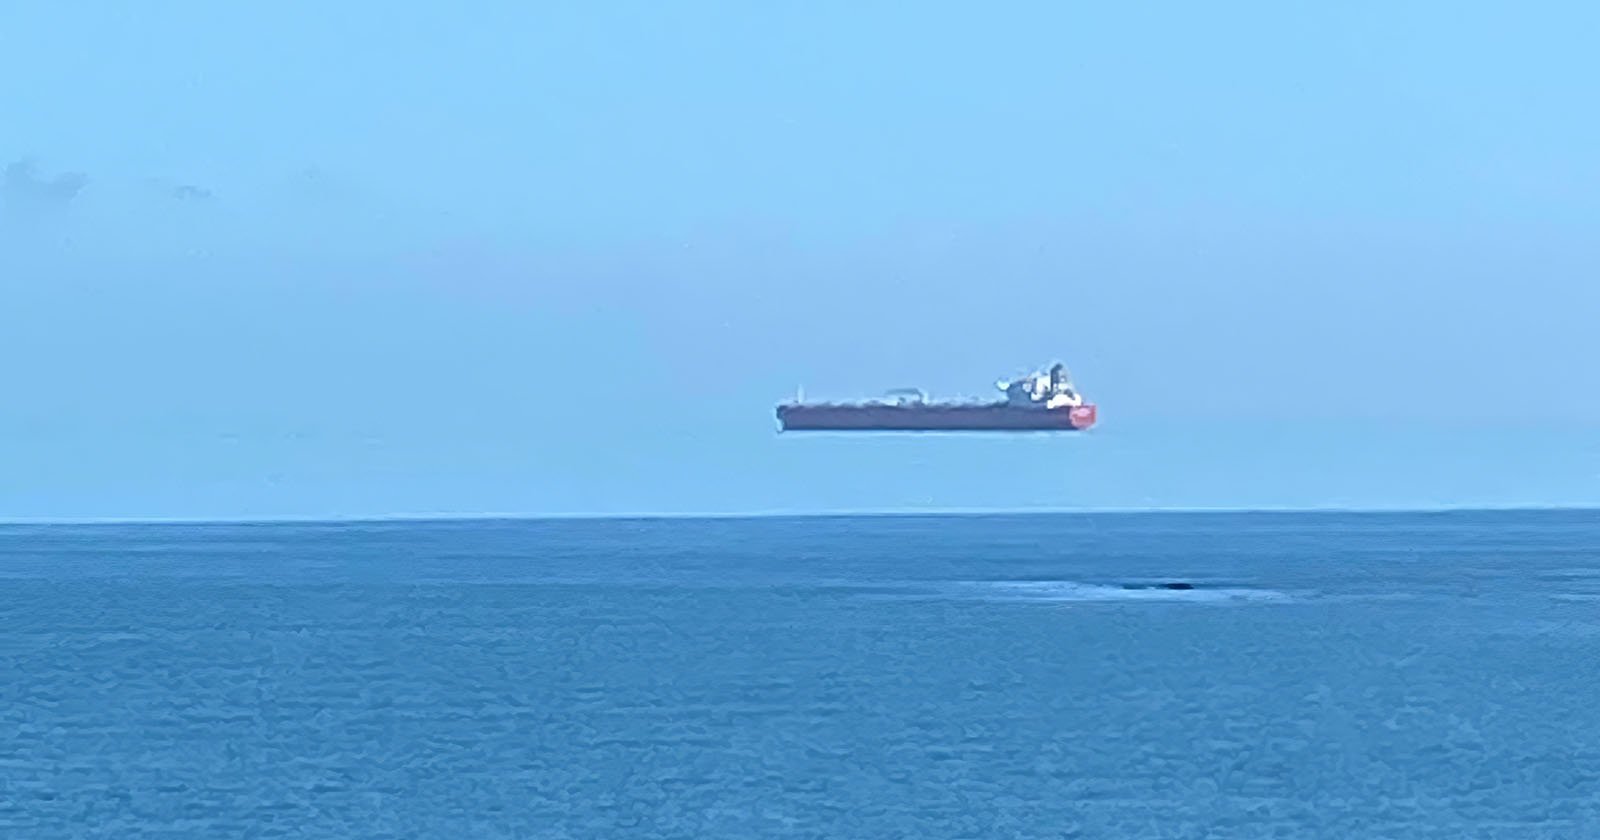 ‘Floating Ship’ in the air off the British coast